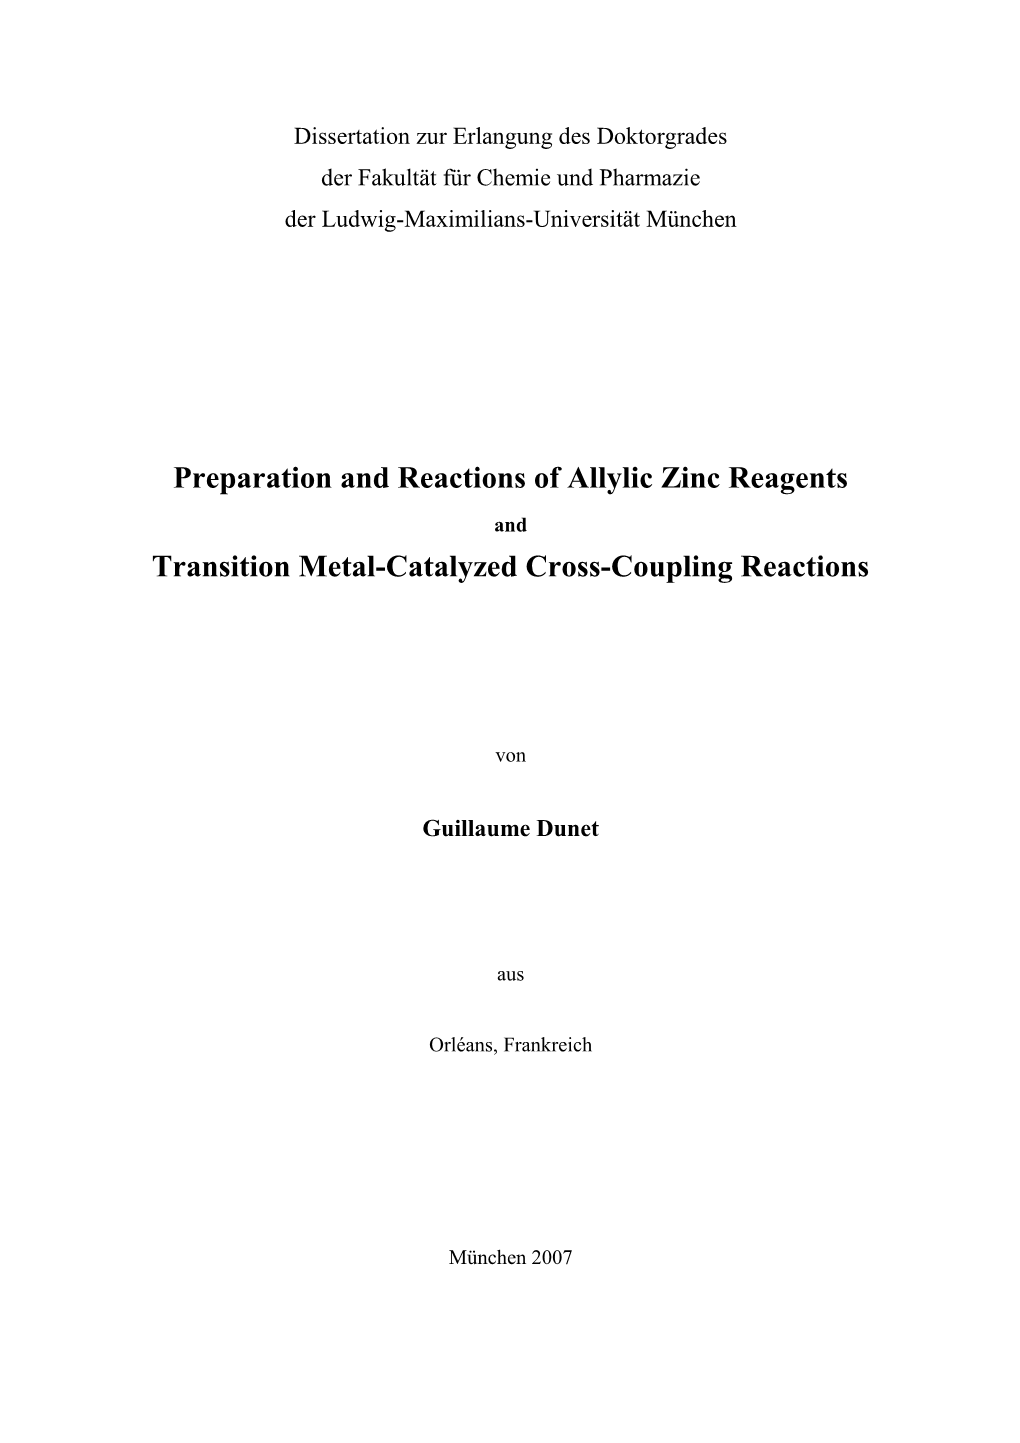 Preparation and Reactions of Allylic Zinc Reagents and Transition Metal